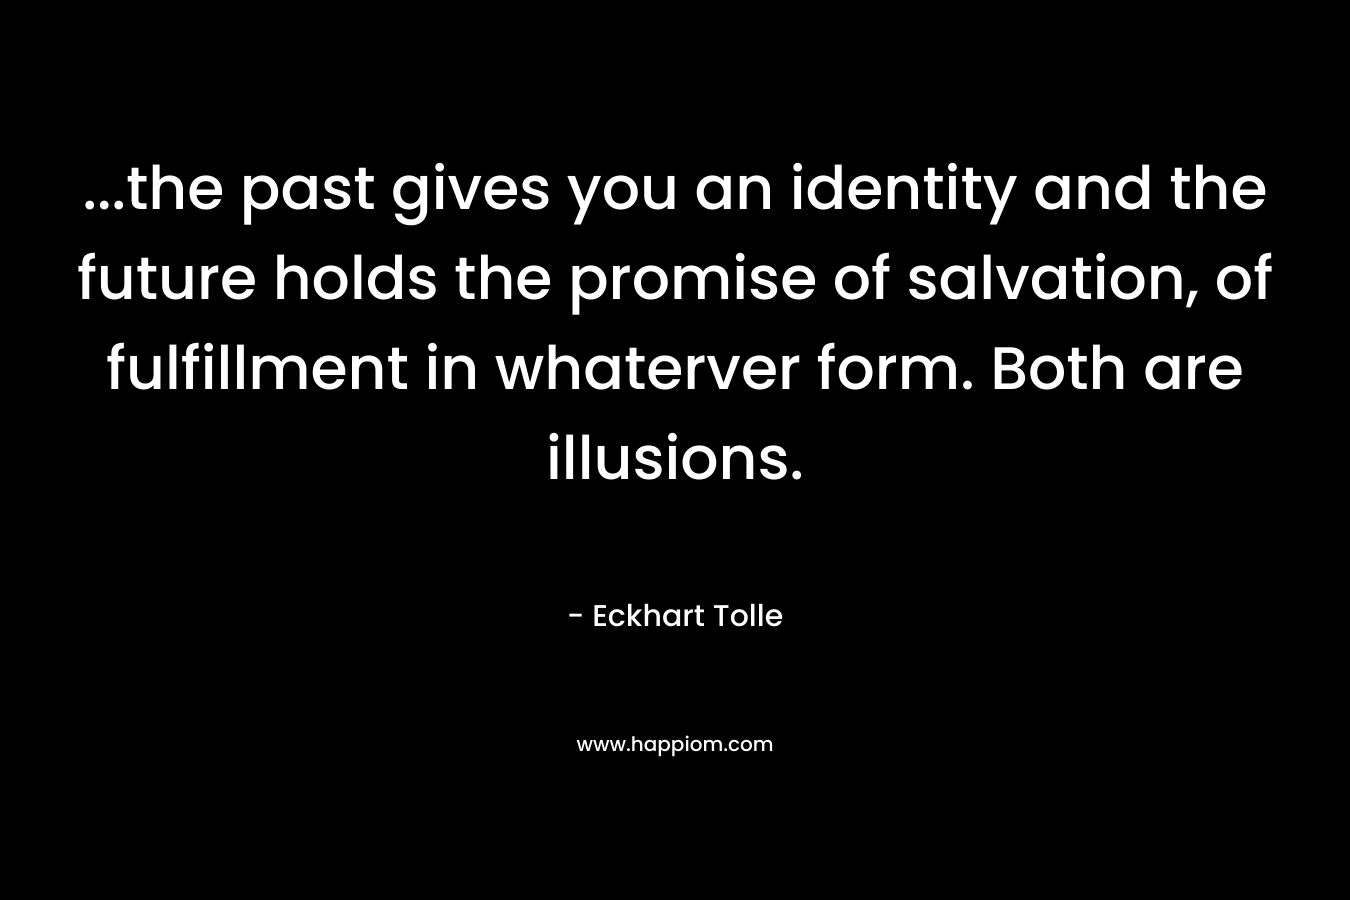 …the past gives you an identity and the future holds the promise of salvation, of fulfillment in whaterver form. Both are illusions. – Eckhart Tolle